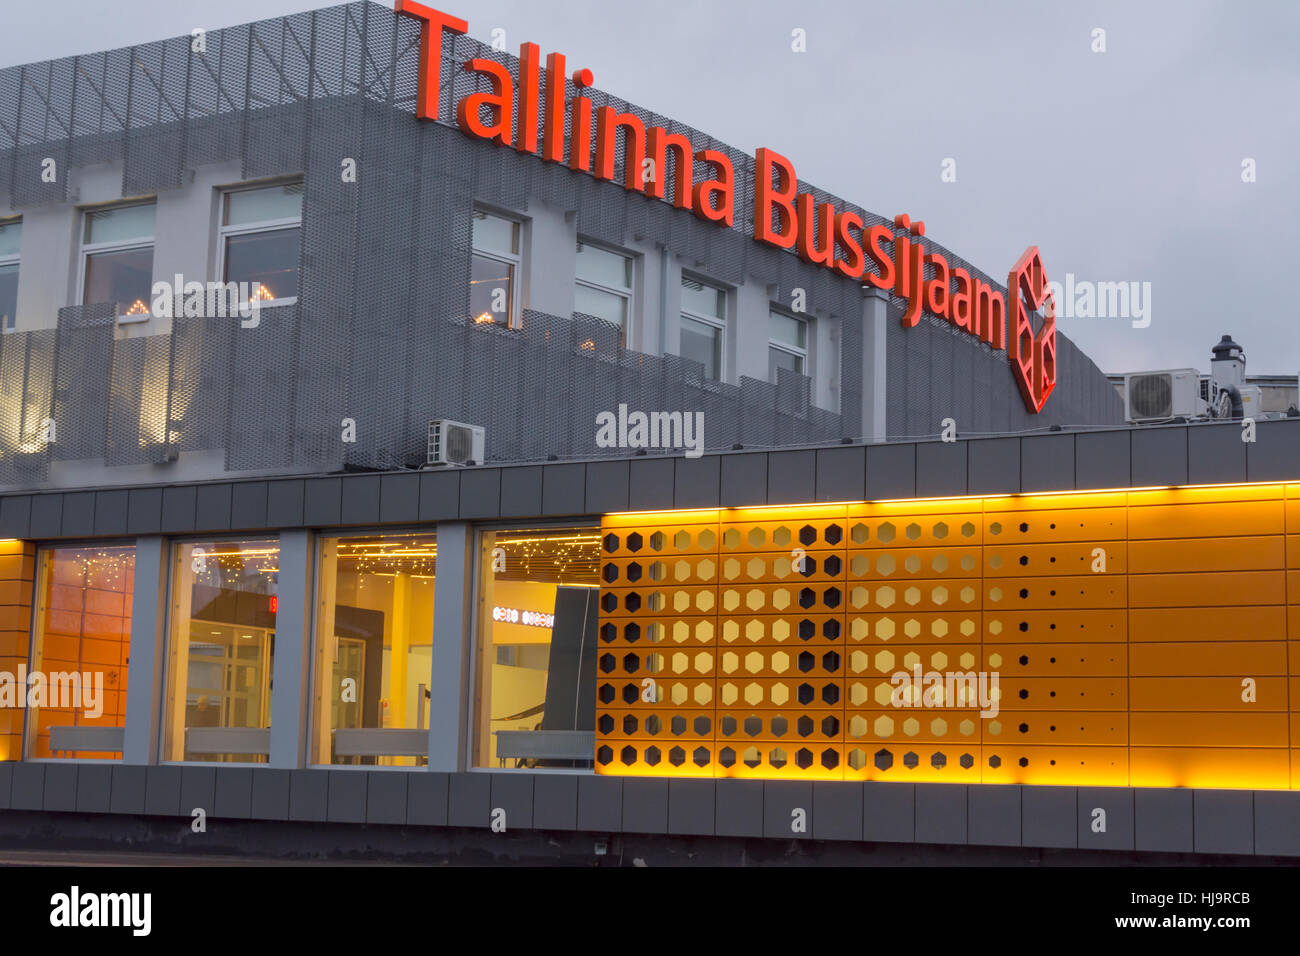 Tallinn Bus Station High Resolution Stock Photography and Images - Alamy